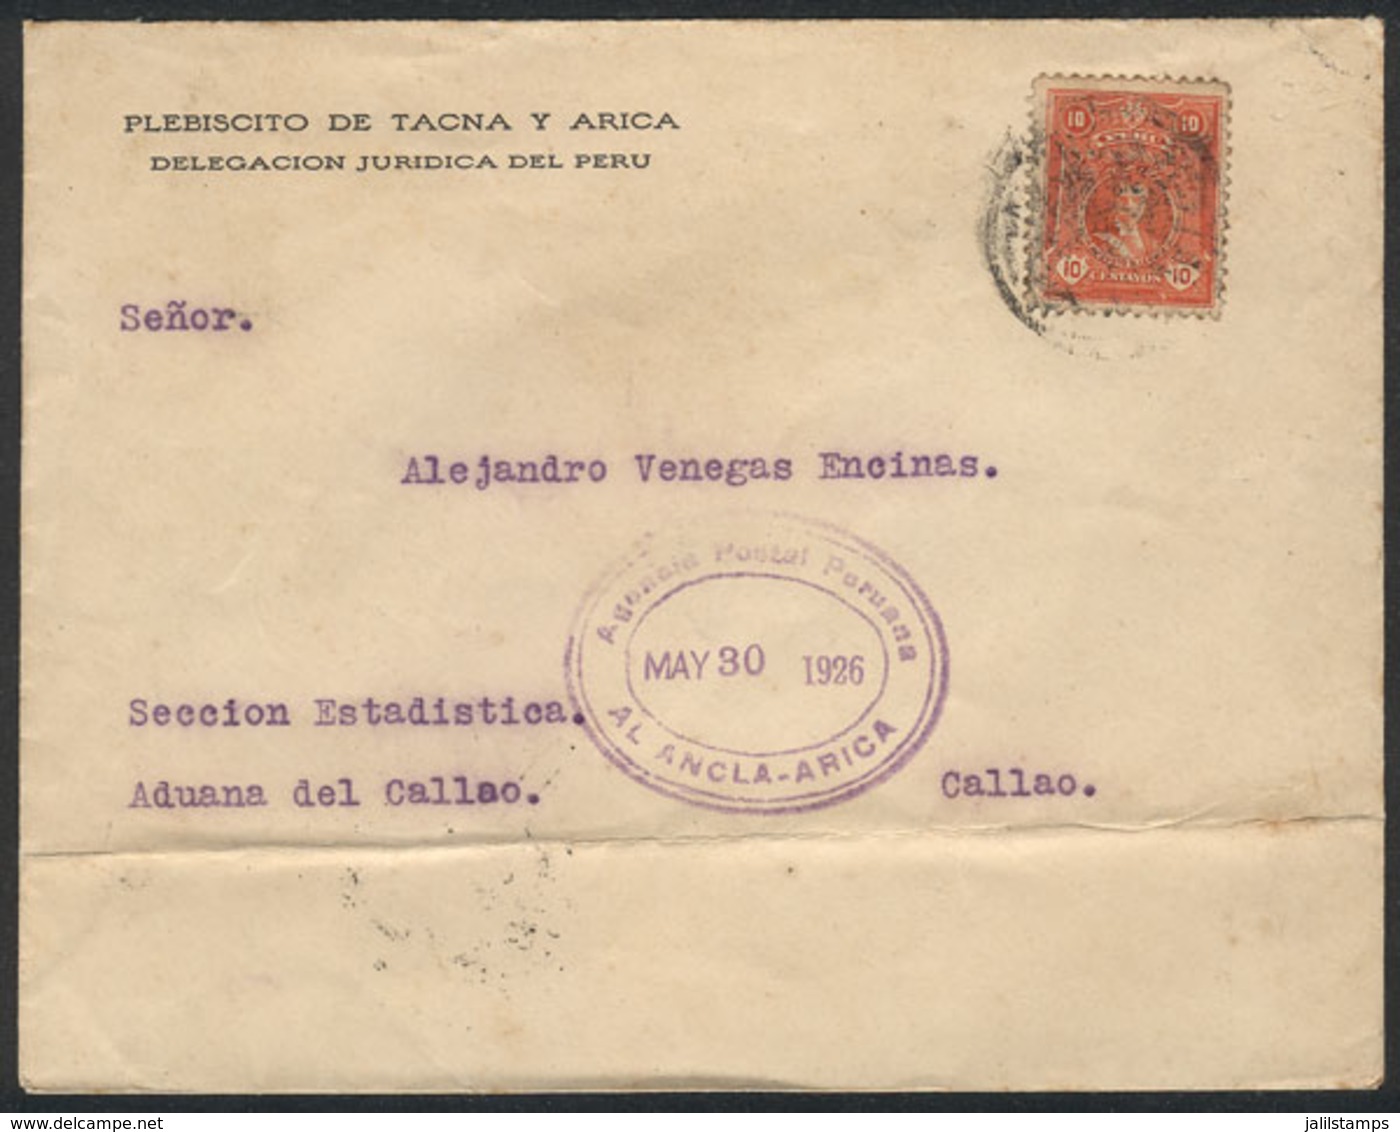 PERU: Cover Franked By Sc.245 And Sent To El Callao On 30/MAY/1926, With Interesting Oval Agencia Postal Peruana - EL AN - Peru